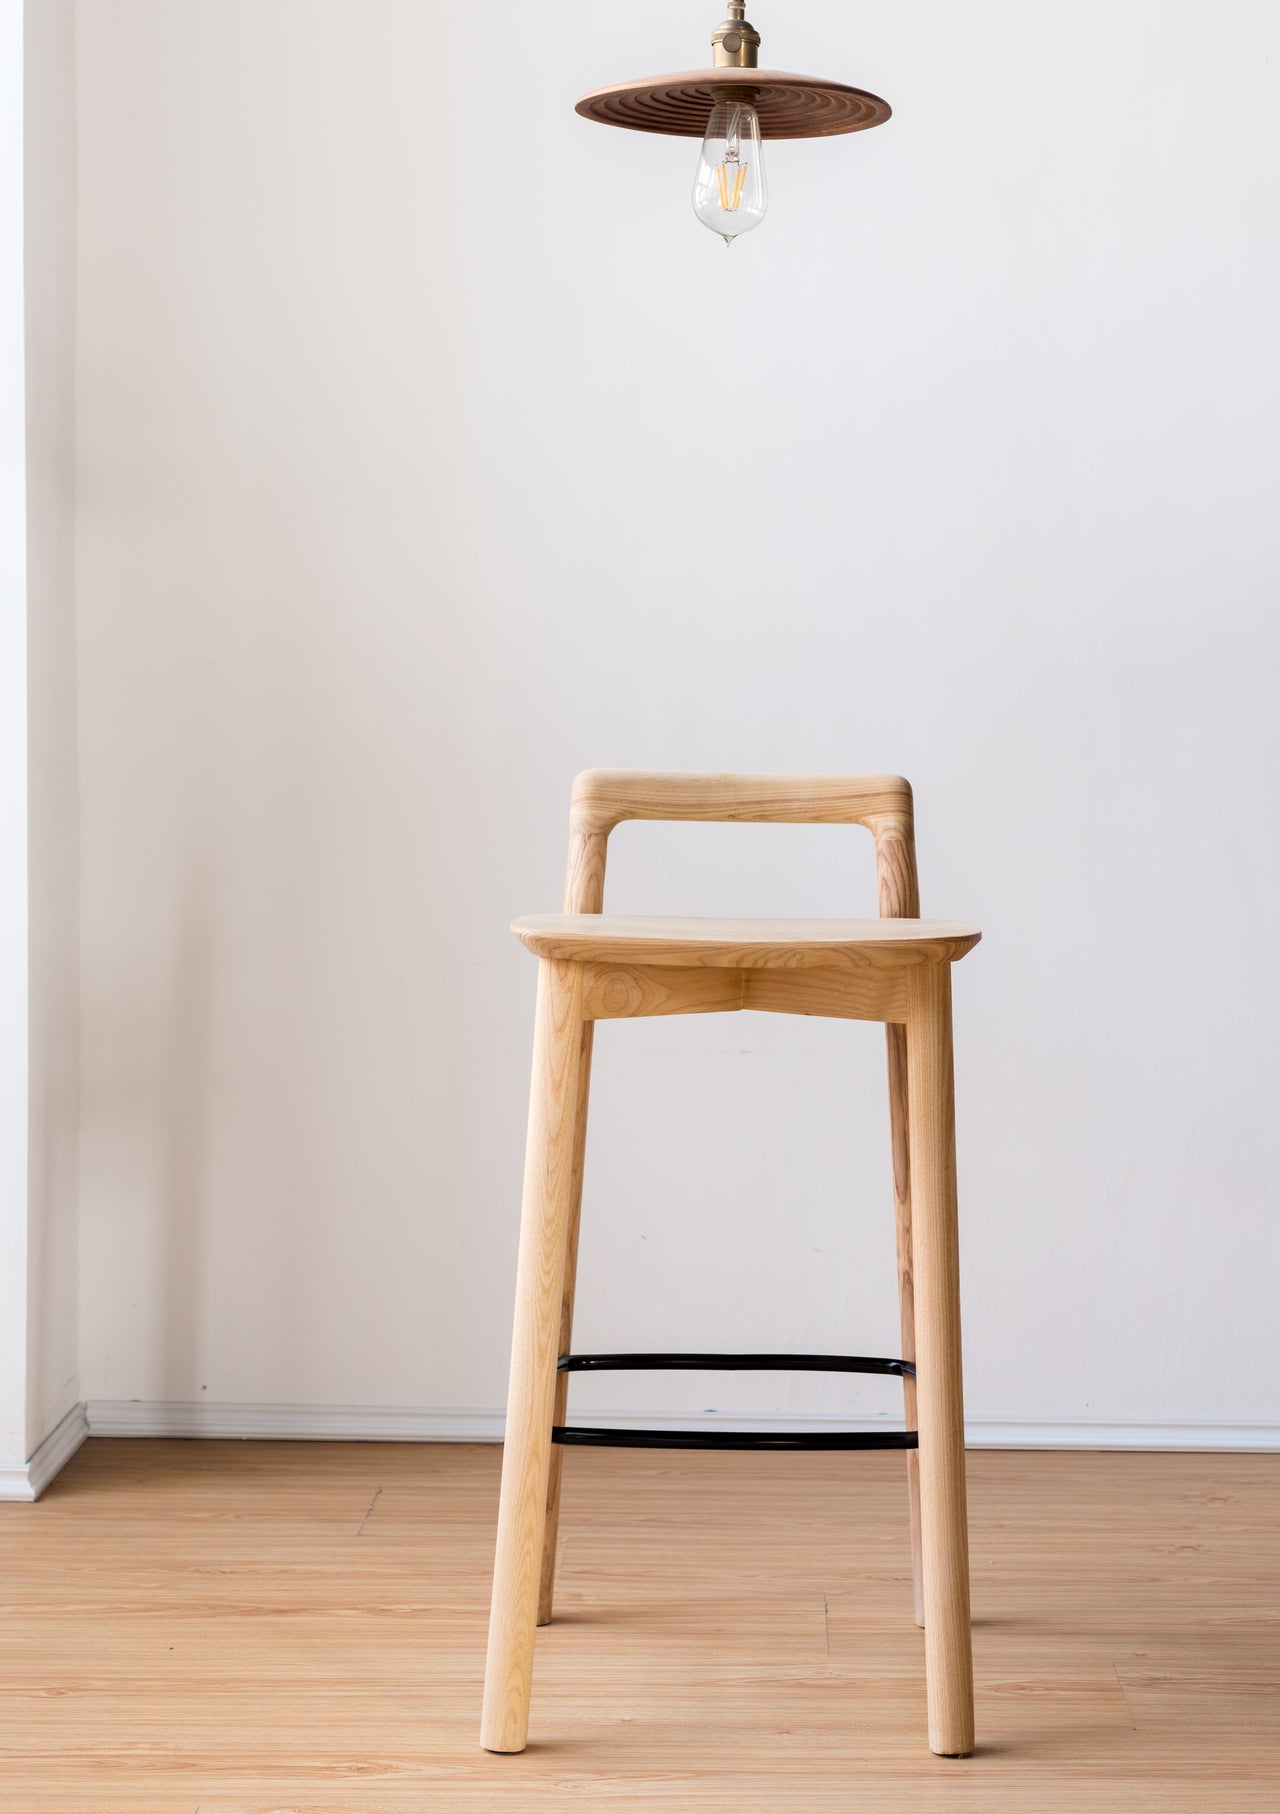 Natural Crafted Wooden Bar Stool with Backrest and Footrest